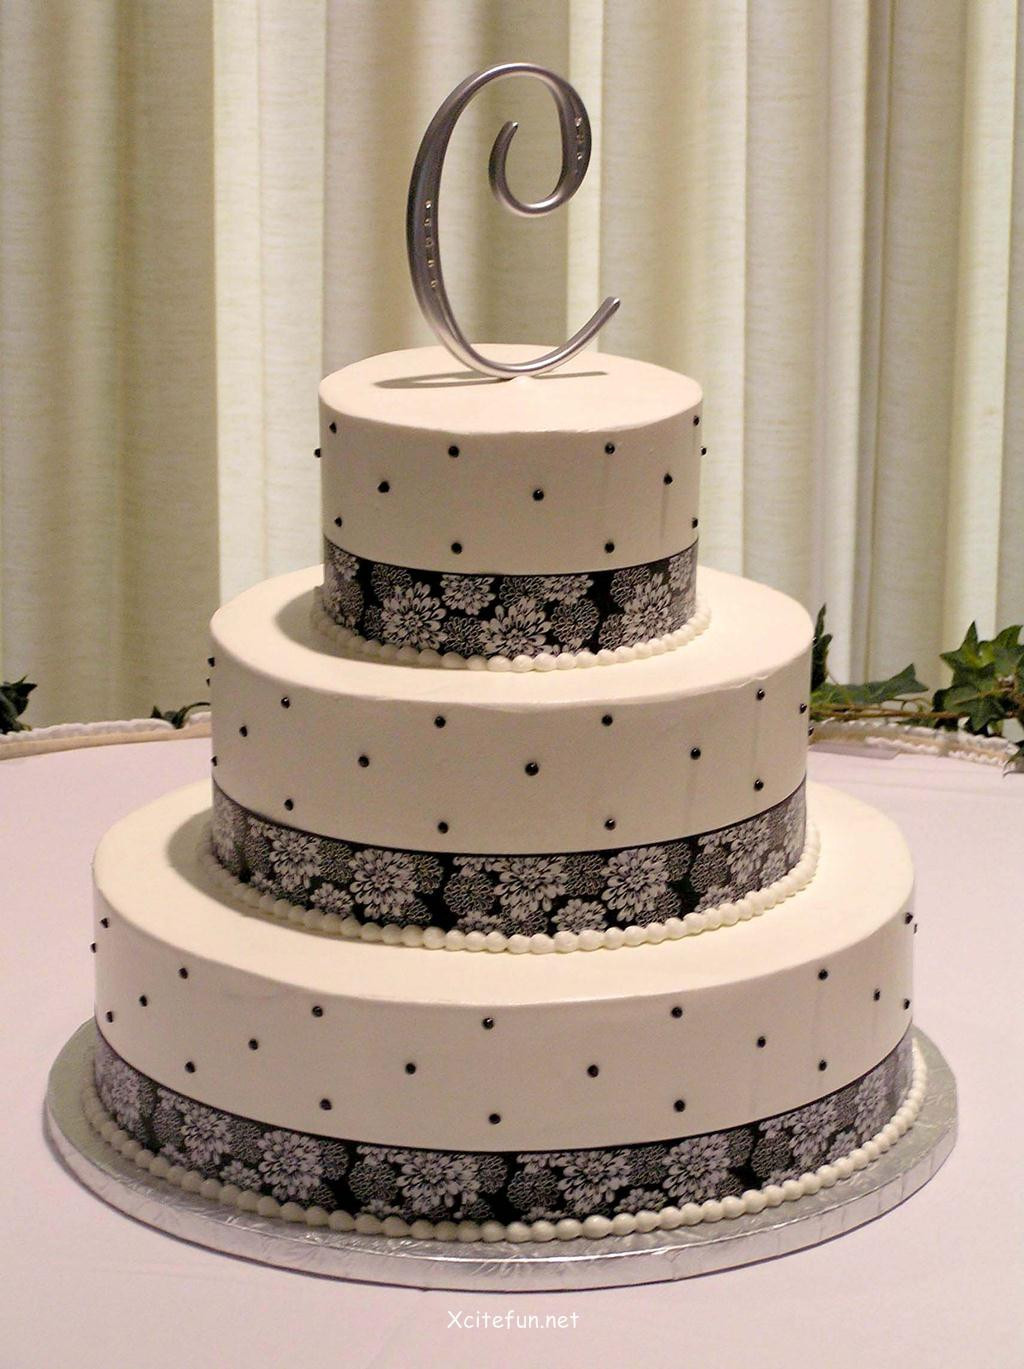 How To Decorate A Wedding Cake
 Wedding Cakes Decorating Ideas XciteFun